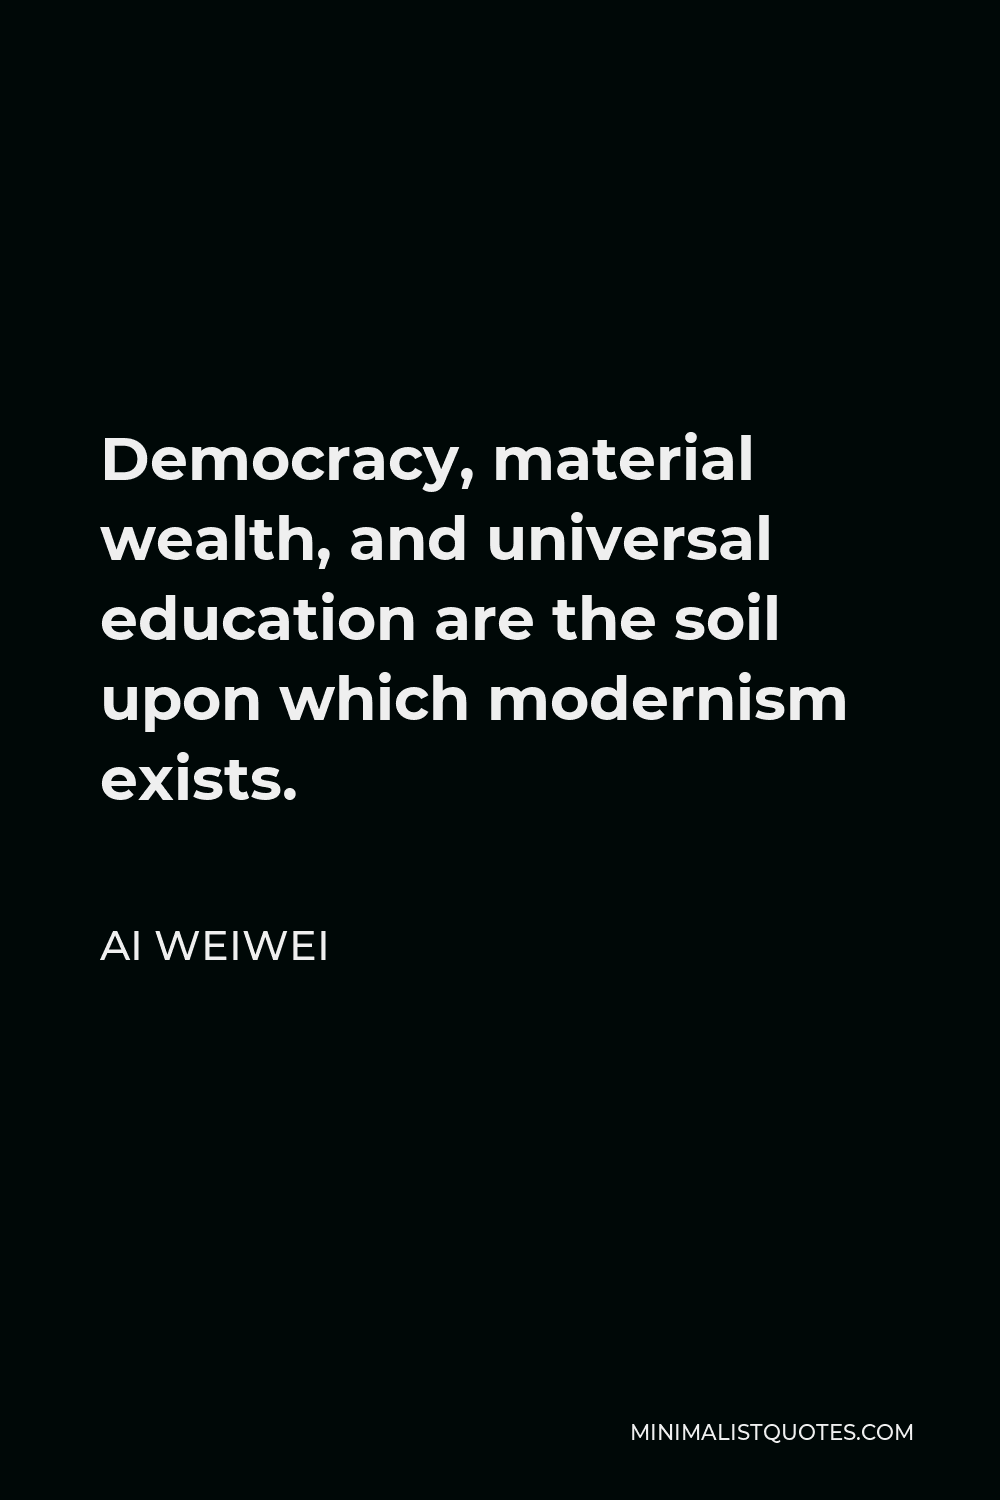 Ai Weiwei Quote - Democracy, material wealth, and universal education are the soil upon which modernism exists.